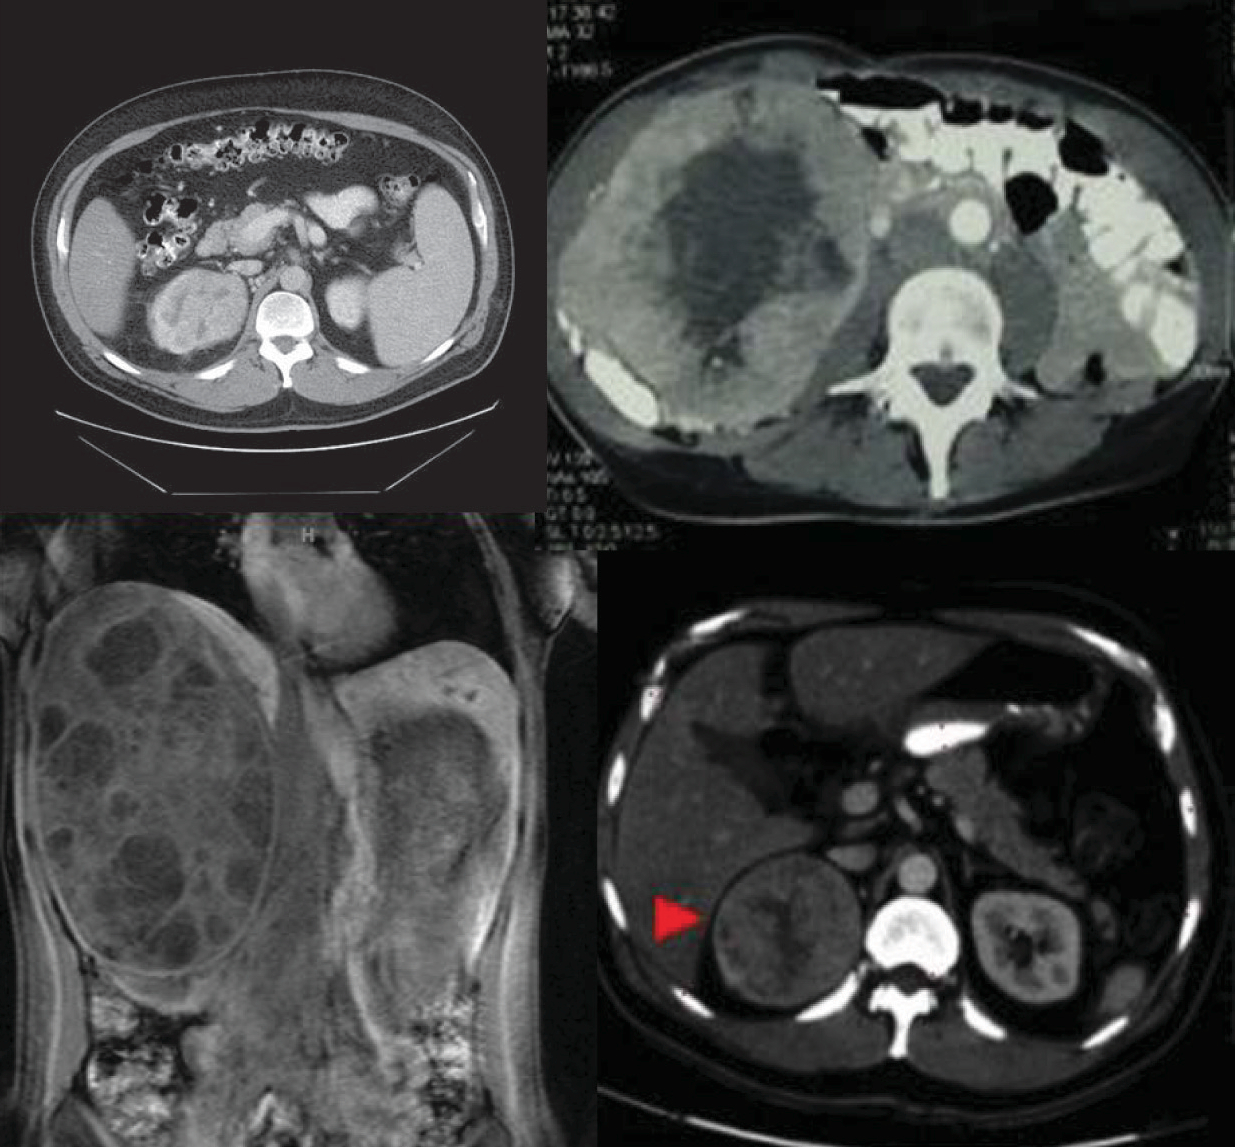 Examples of CT scans demonstrating large kidney tumors removed by laparoscopic radical nephrectomy